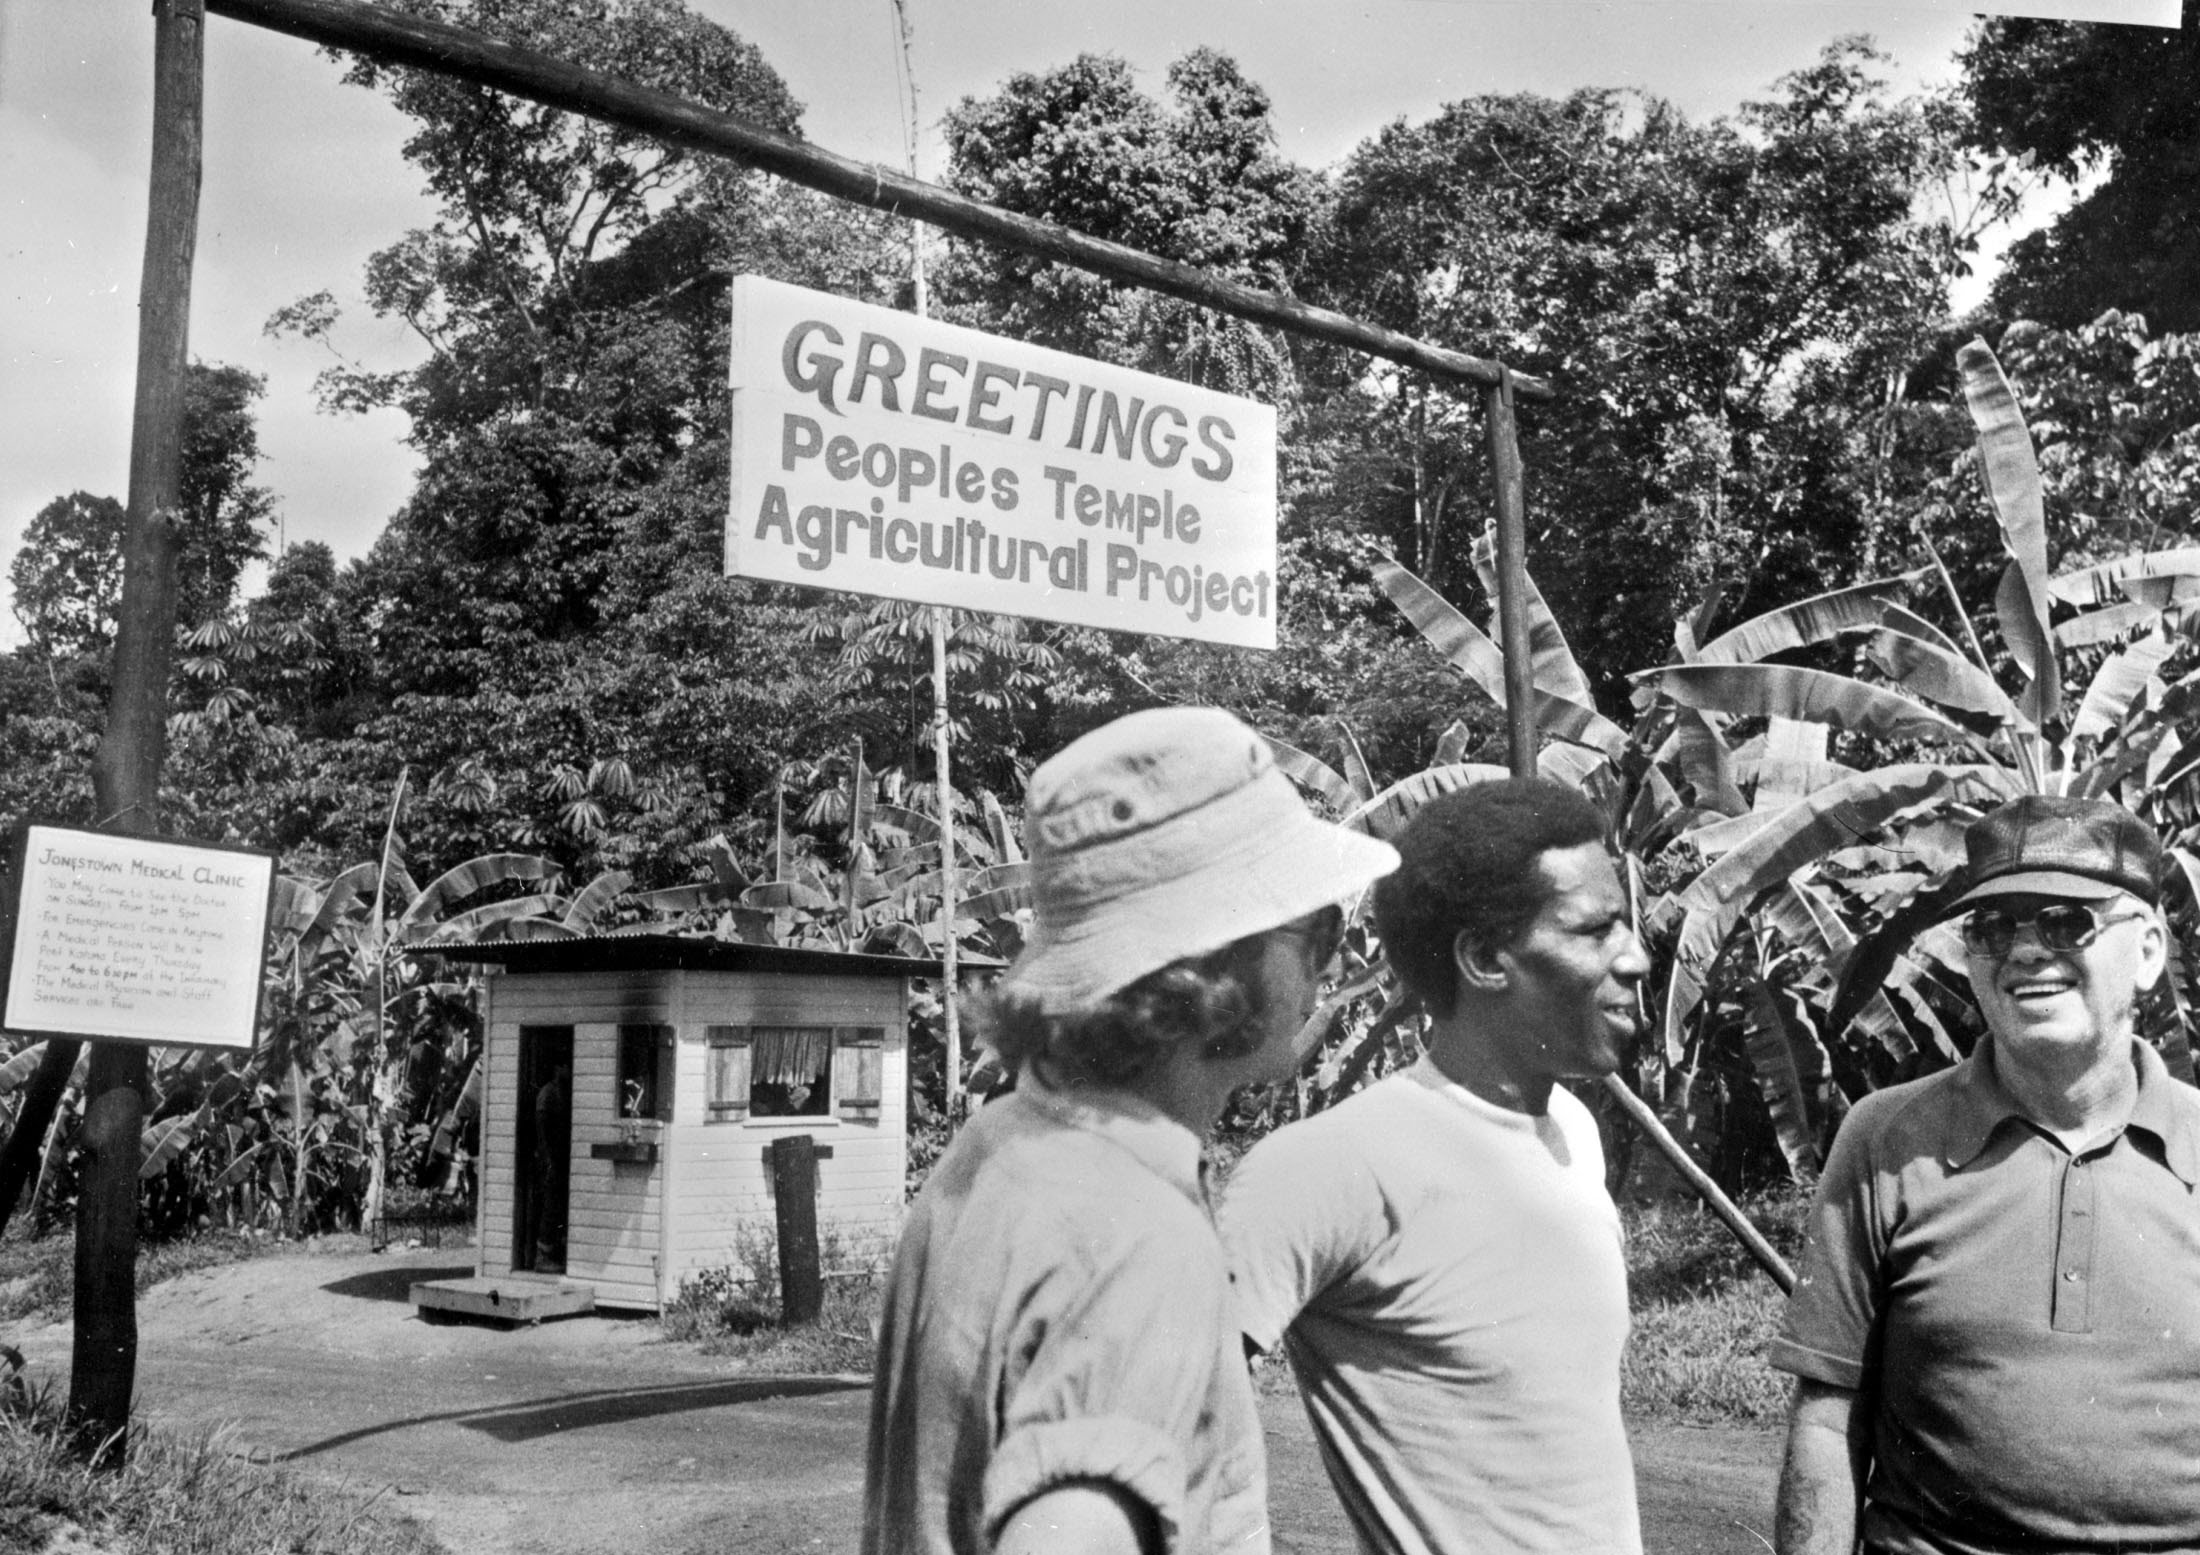 A 1978 photo of the People's Temple Agricultural Project in northwestern Guyana, also known as "Jonestown", led by cult leader Jim Jones. On November 18, 1978, 909 cult members died by "revolutionary suicide" from cyanide poisoning, orchestrated by Jim Jones, and five other people were murdered by Temple members.